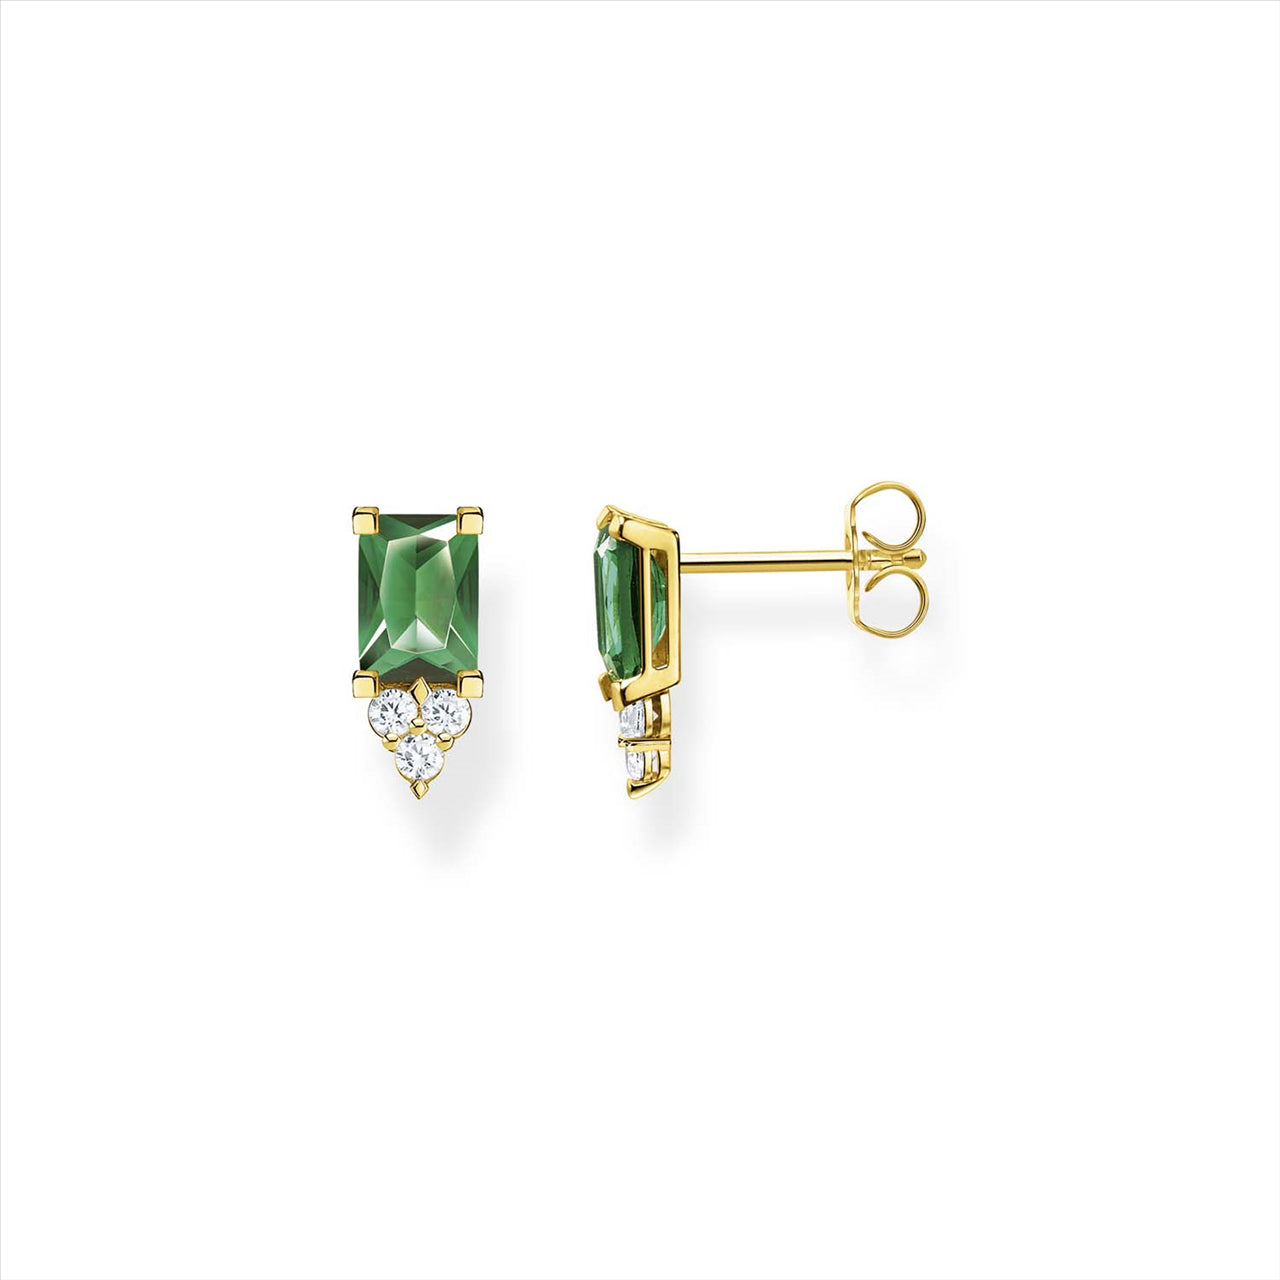 Thomas Sabo 18 Carat Gold Plated Green Stone Stud Earrings